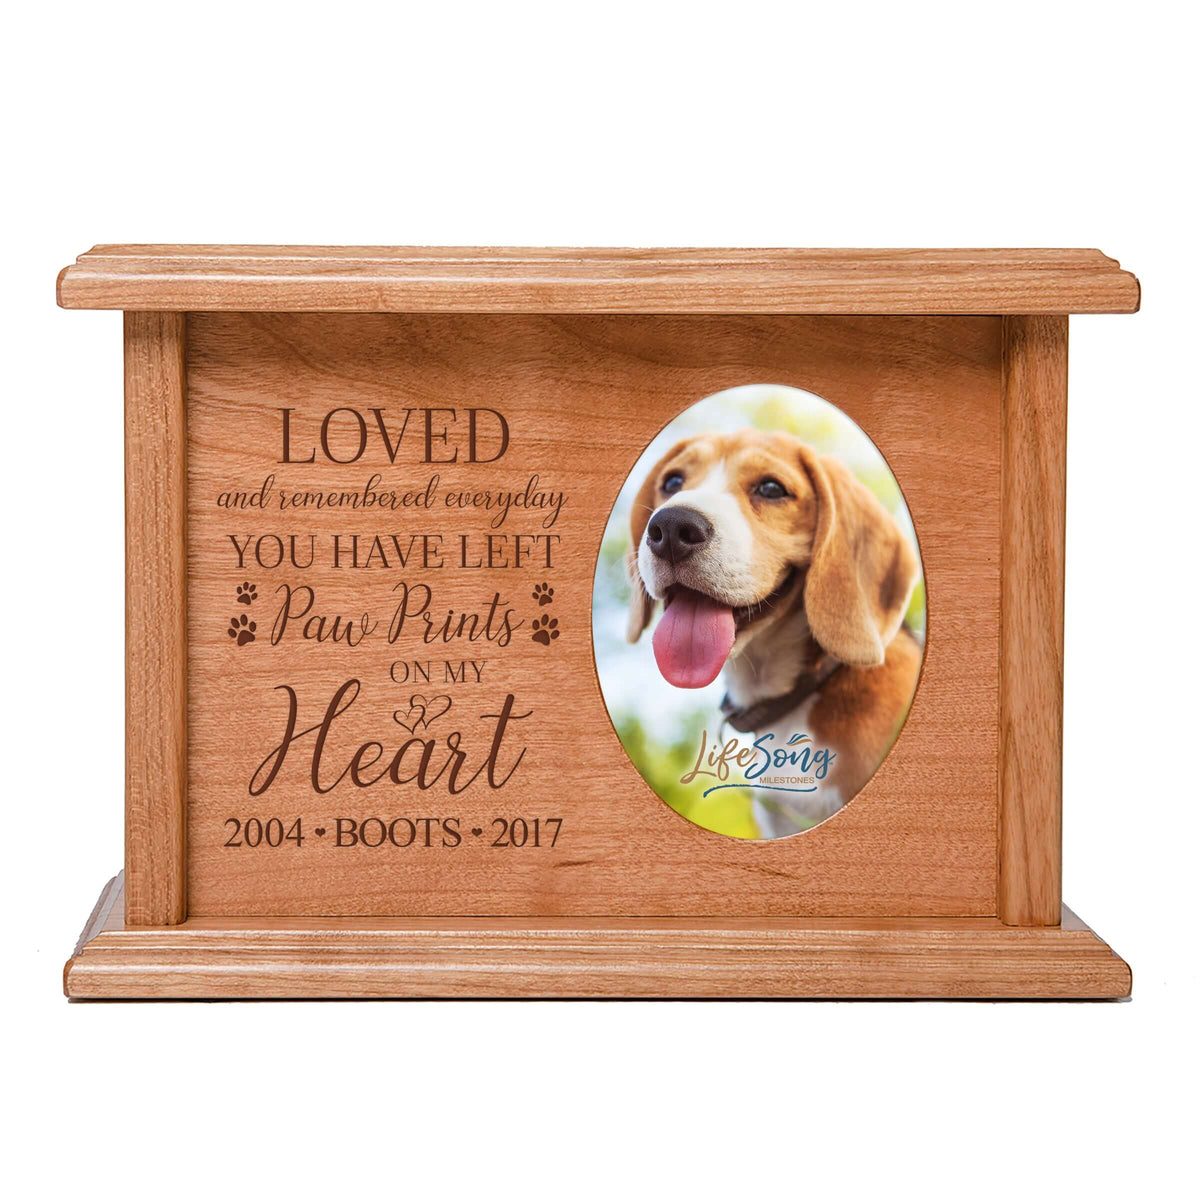 Pet Memorial Picture Cremation Urn Box for Dog or Cat - Loved and Remembered